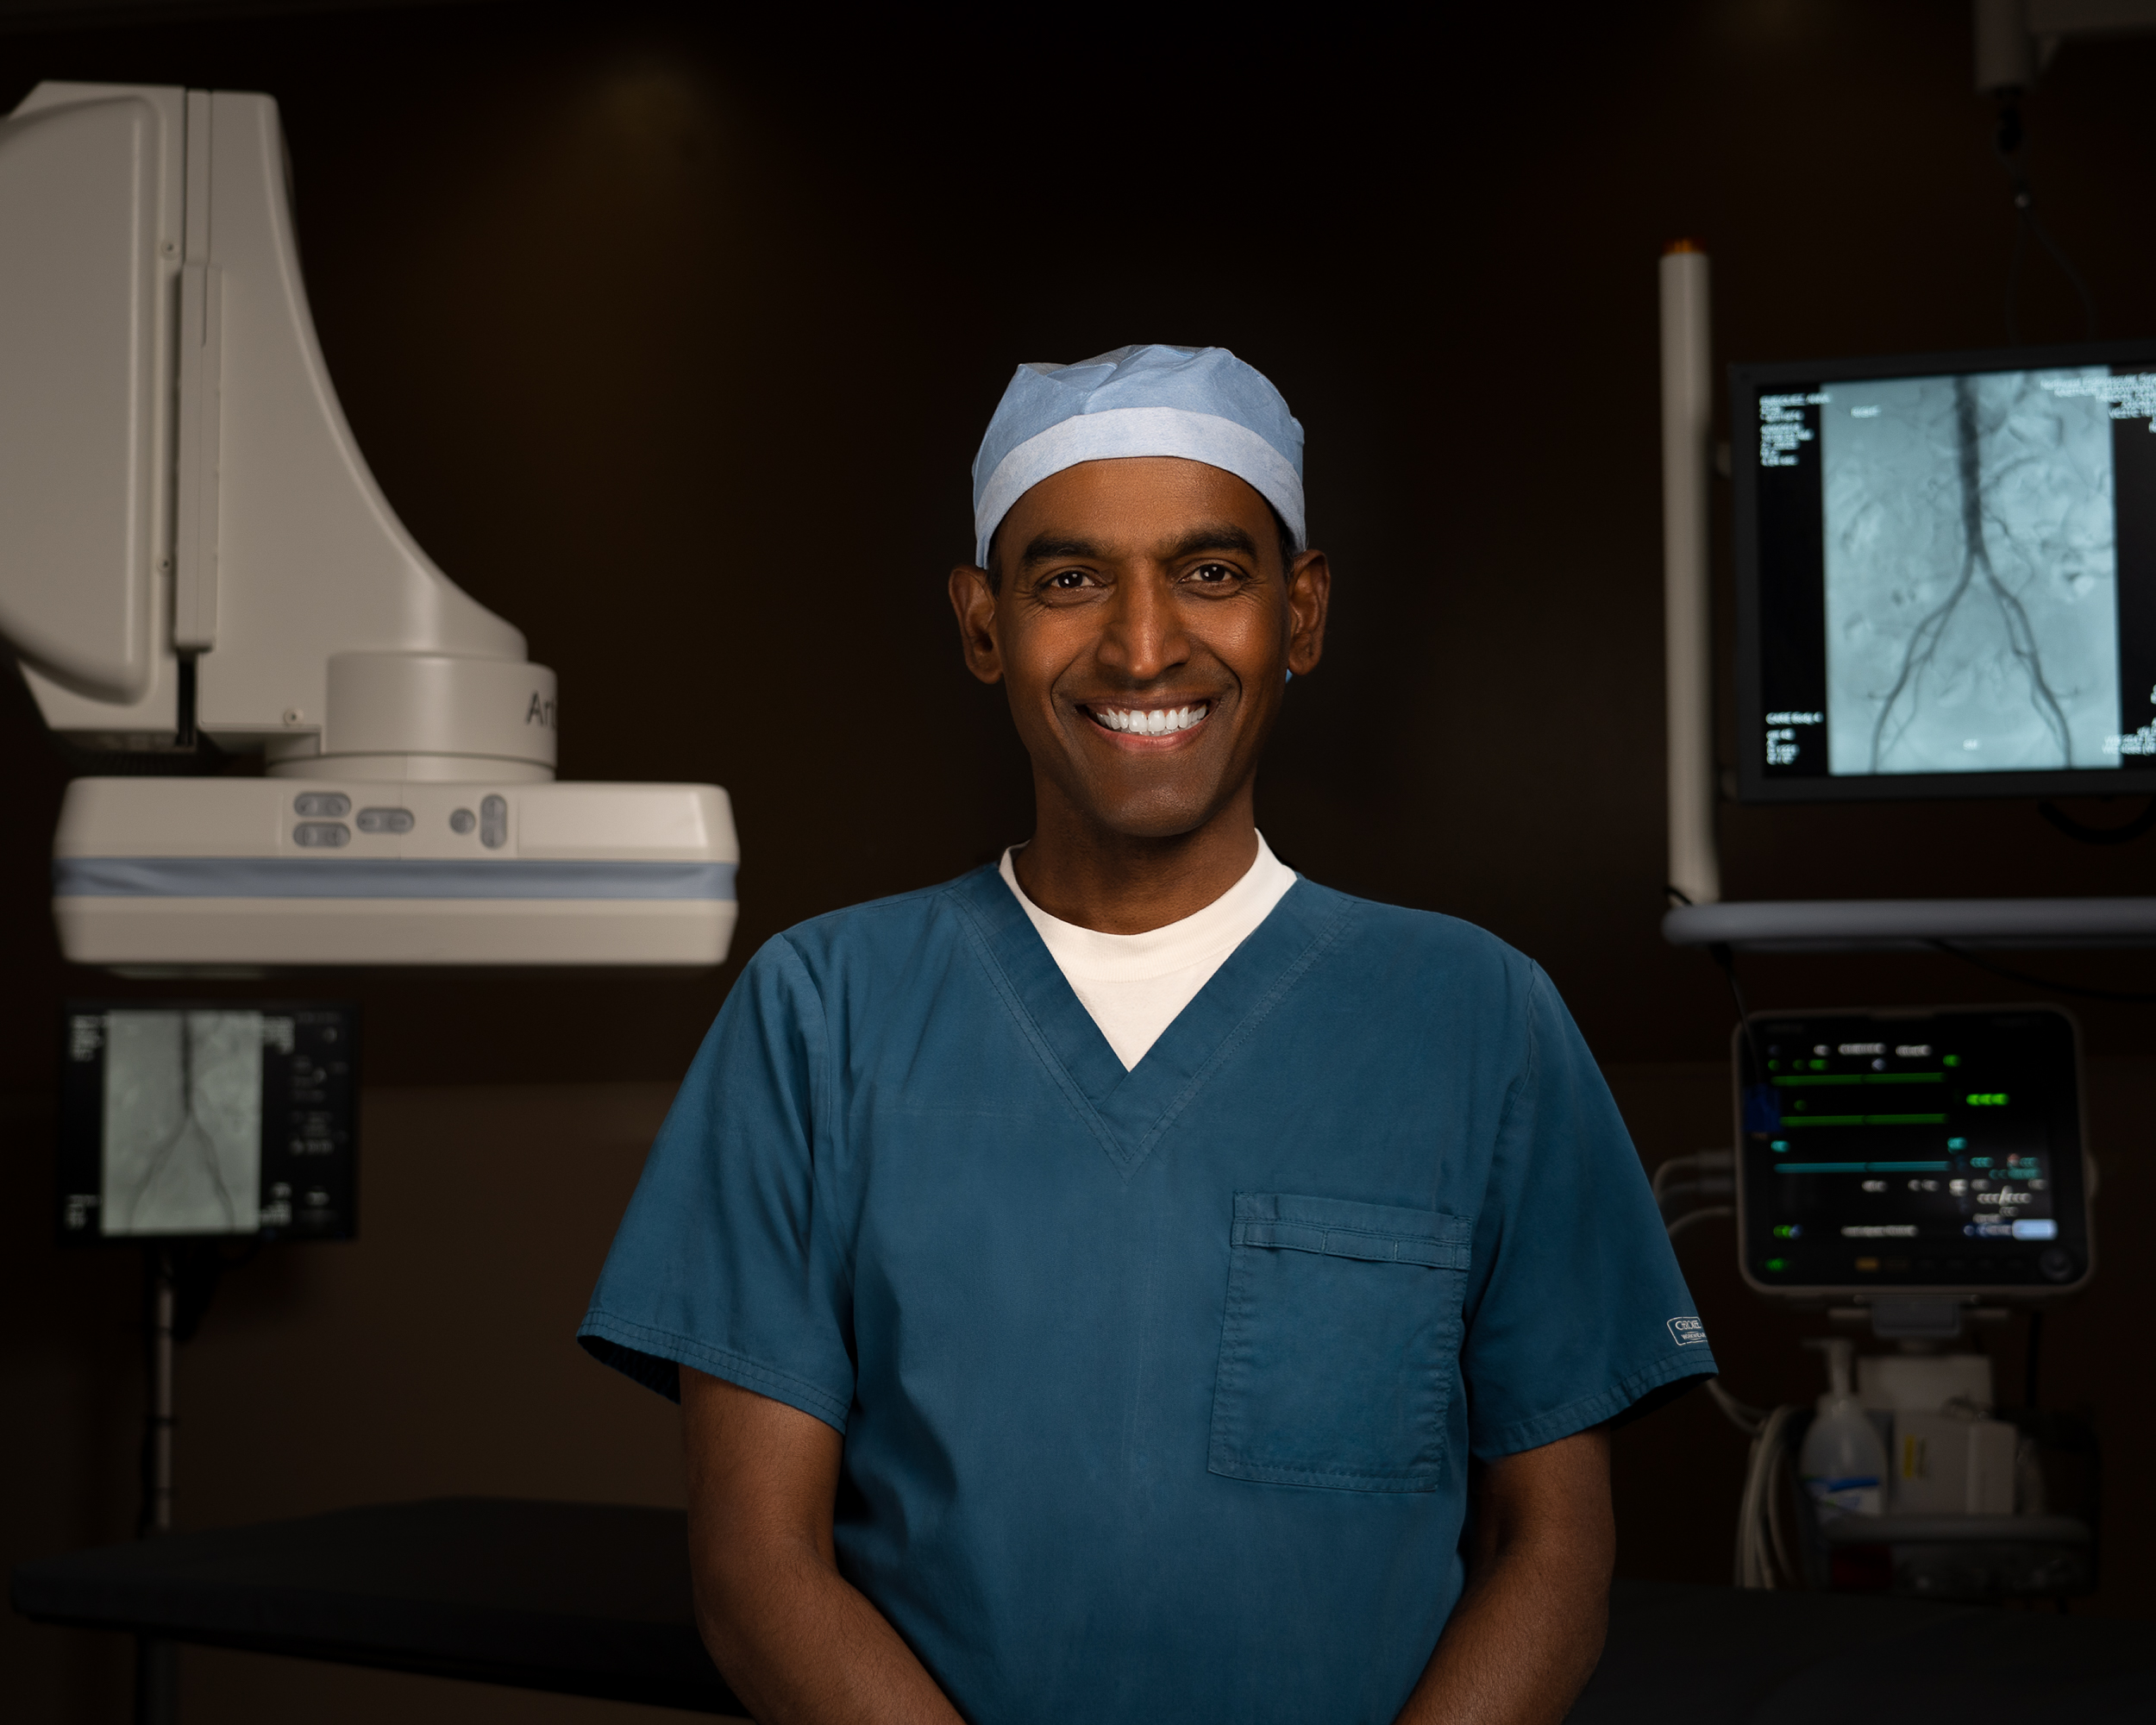 Dr. Kasthuri poses in the room where he conducts advanced, minimally invasive surgeries in an outpatient setting.